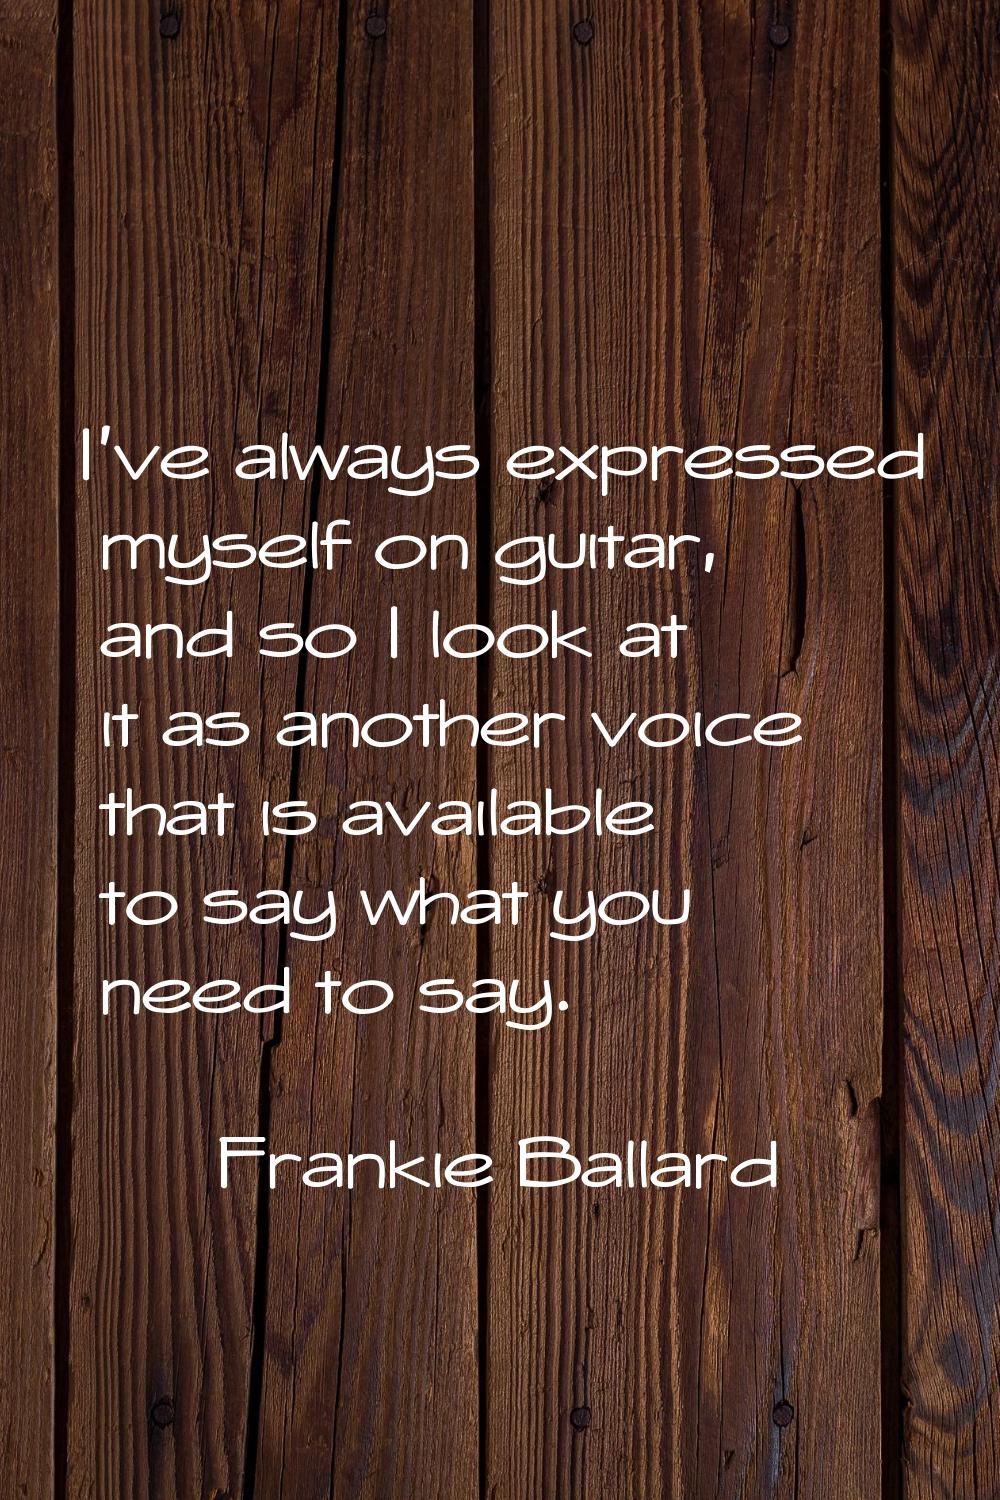 I've always expressed myself on guitar, and so I look at it as another voice that is available to s